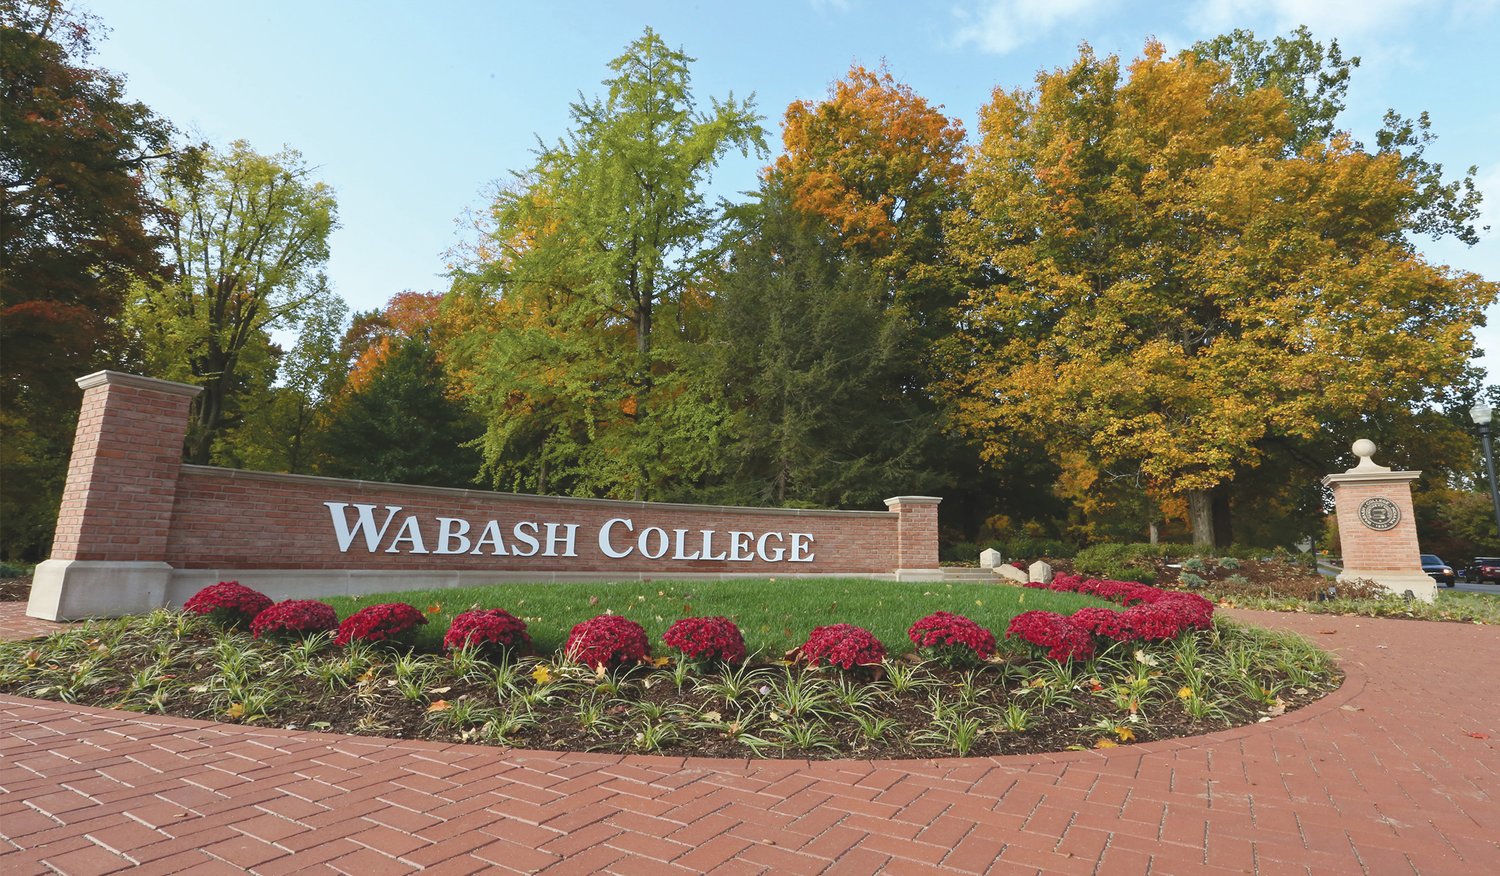 Wabash College has received a $1 million grant from Lilly Endowment Inc. through its initiative, Charting the Future for Indiana’s Colleges and Universities.